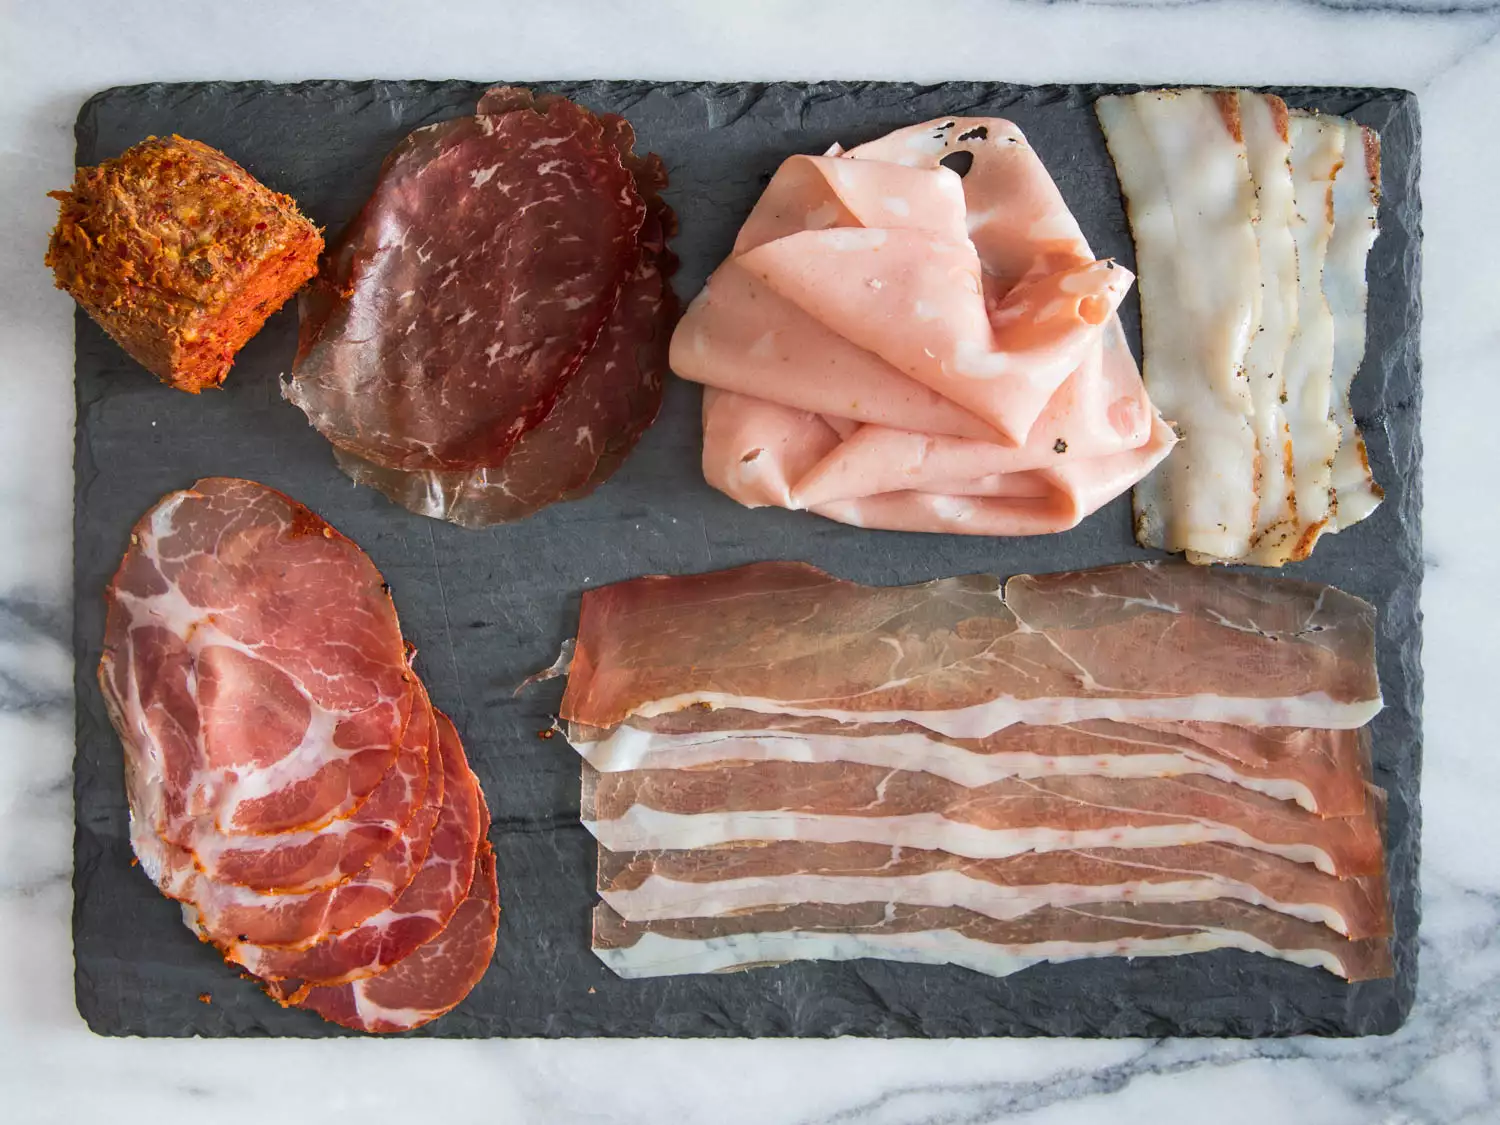 An assortment of salumi on a slate charcuterie board. I would use wood for this.